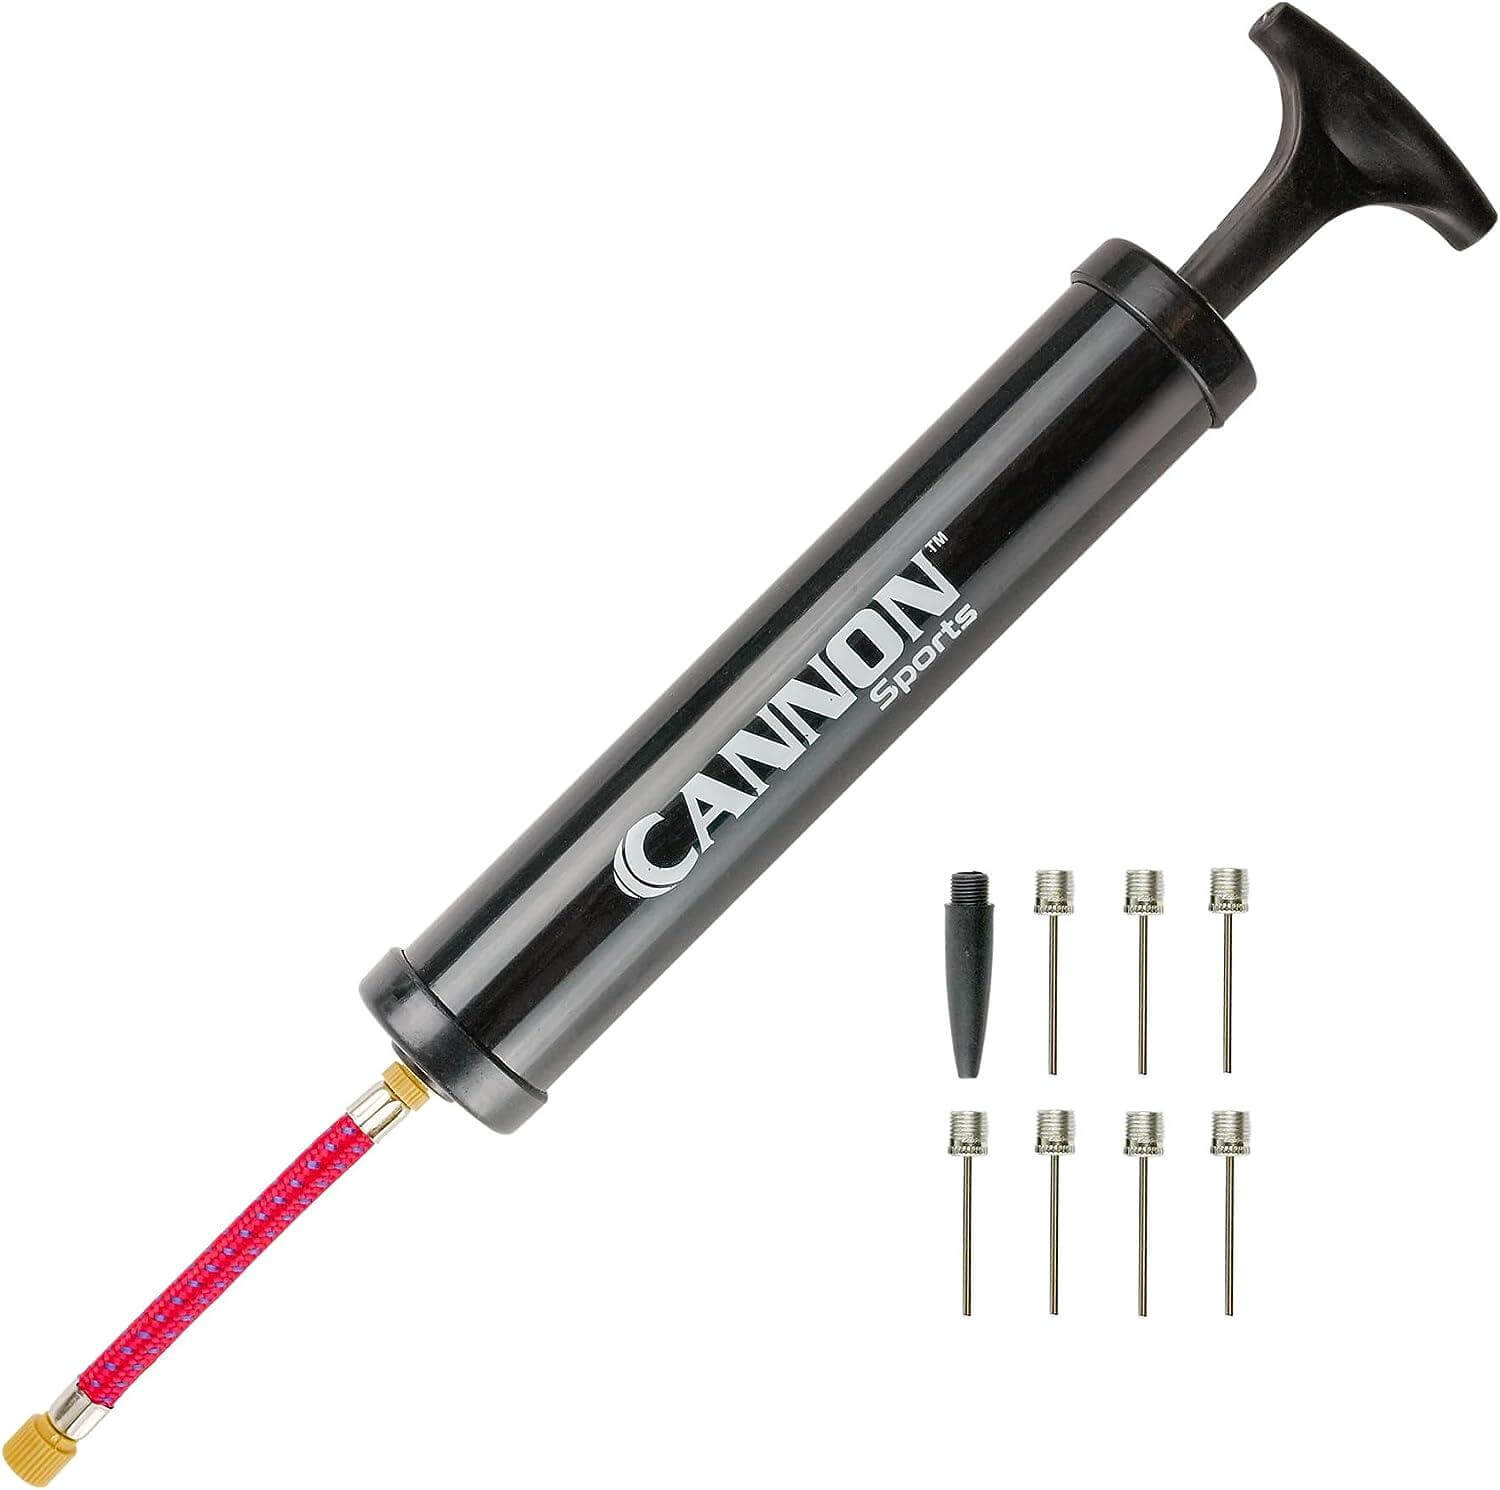 Cannon Sports Ball Pump Set with 7 Inflation Needles, Nozzle, and Extension Hose - Cannon Sports